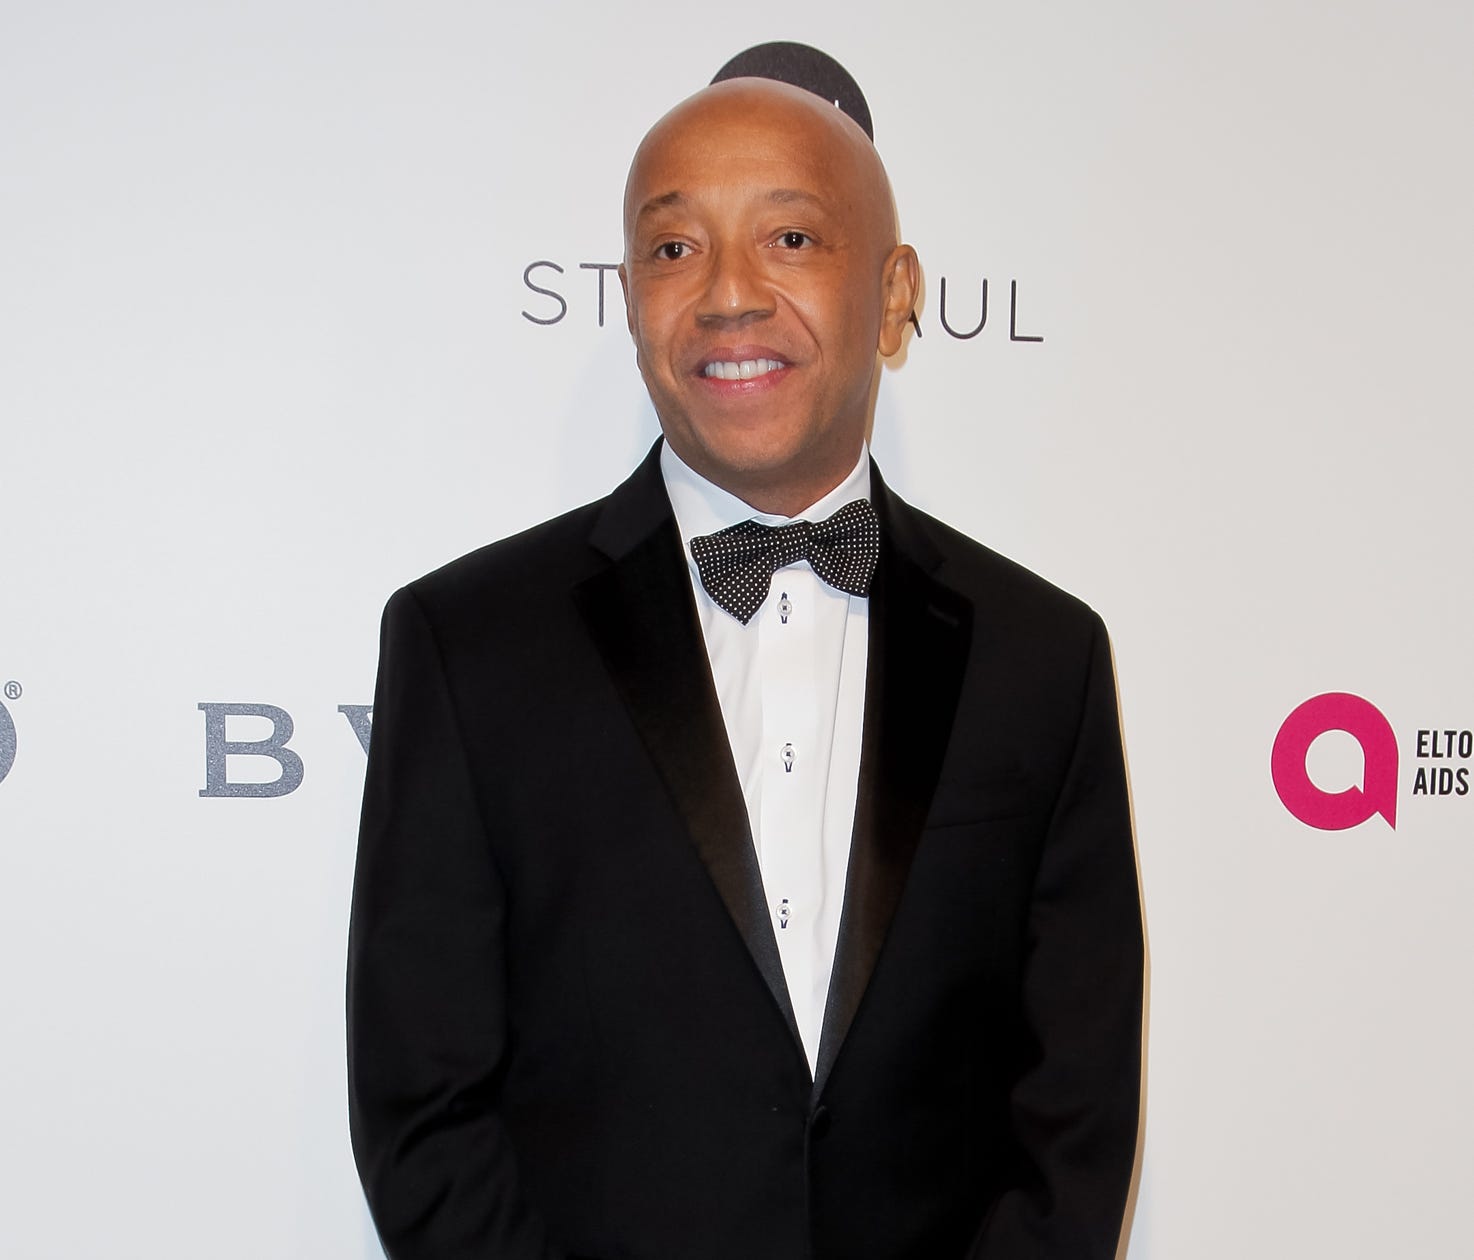 Four new women have stepped forward to accuse Russell Simmons of sexual assault.